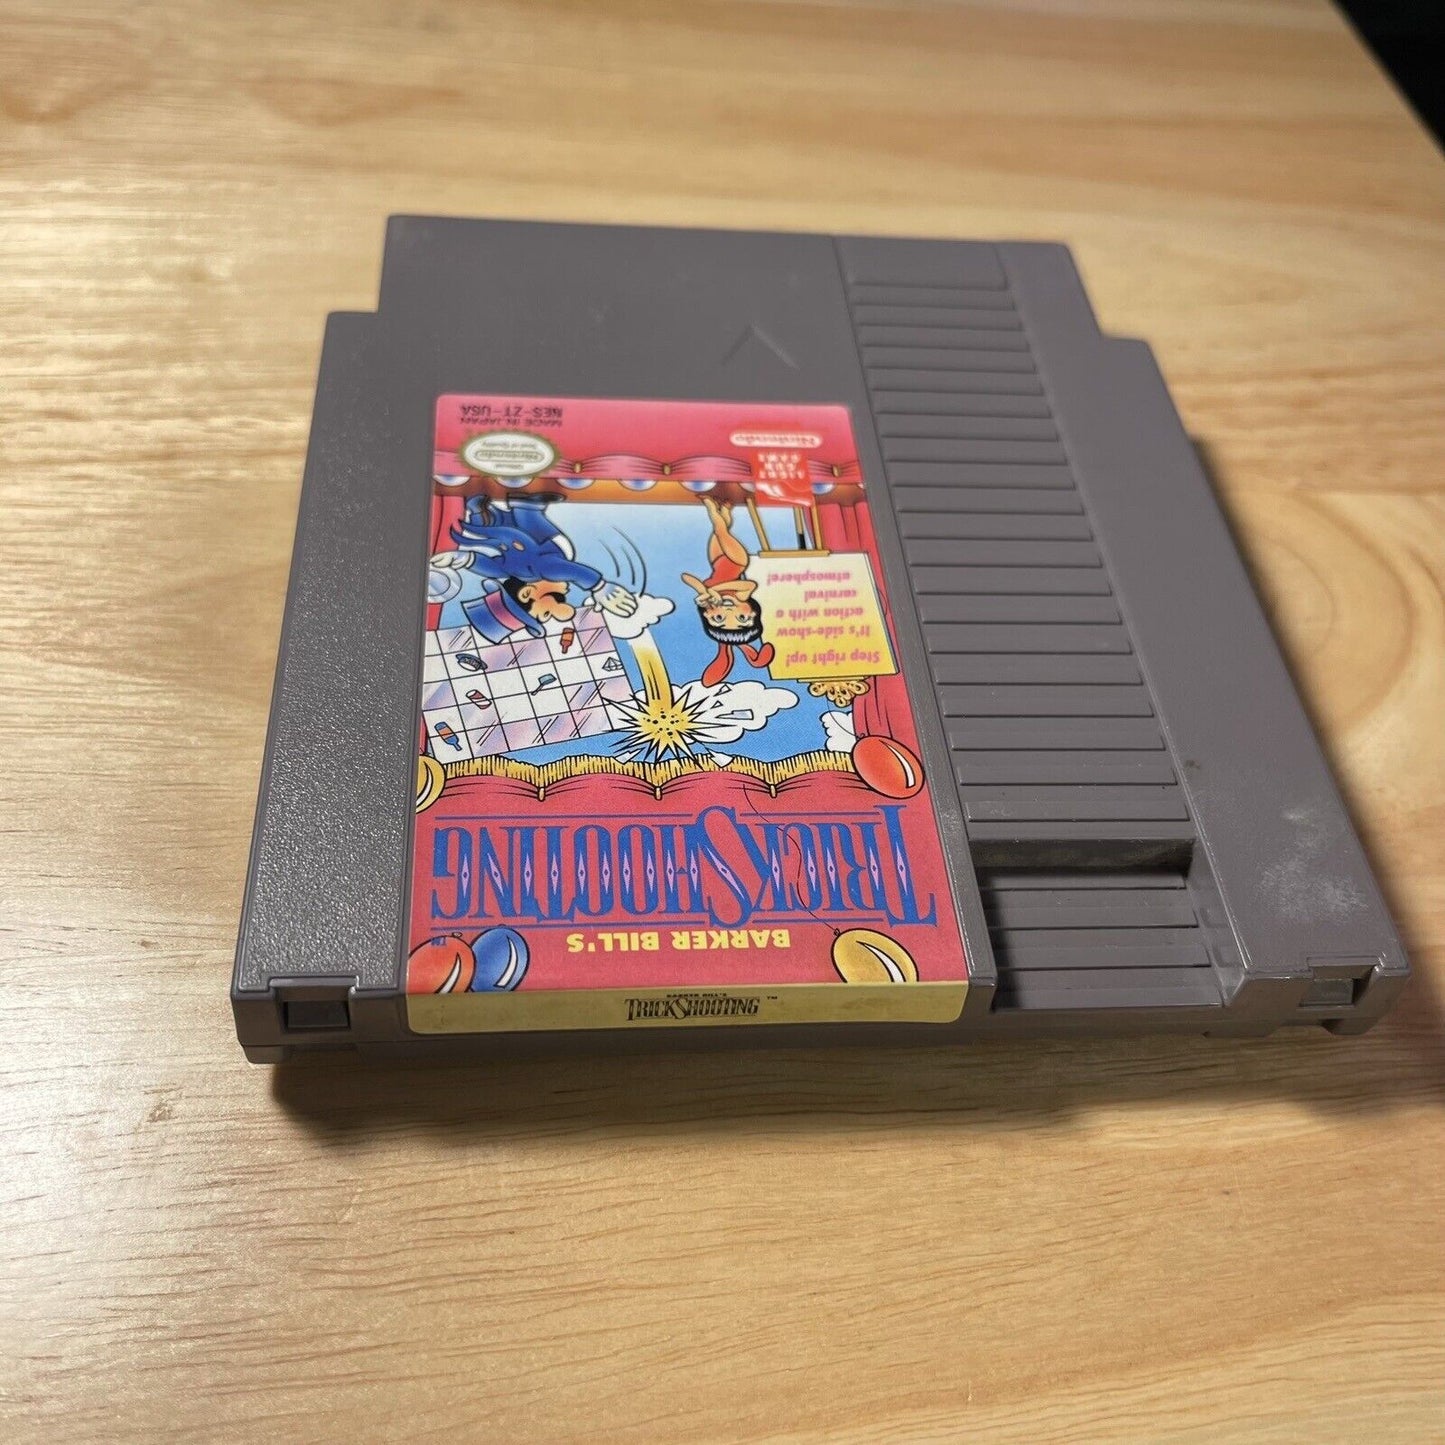 Barker Bill's Trick Shooting (Nintendo NES, 1990) - Cartridge Only - Tested